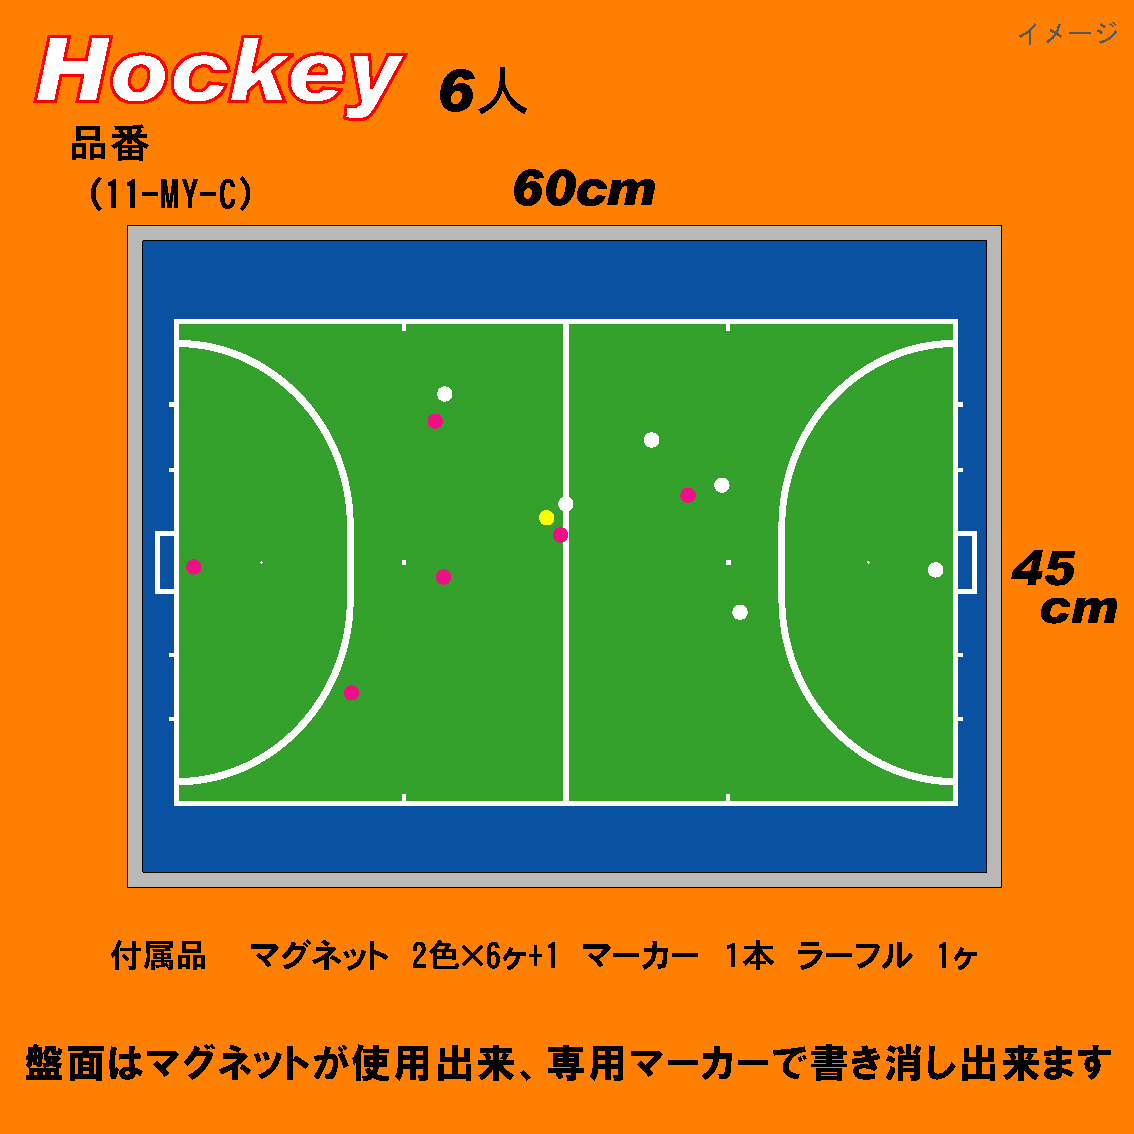  military operation board speciality shop Tom's sports field hockey 6 person system M size color horizontal 